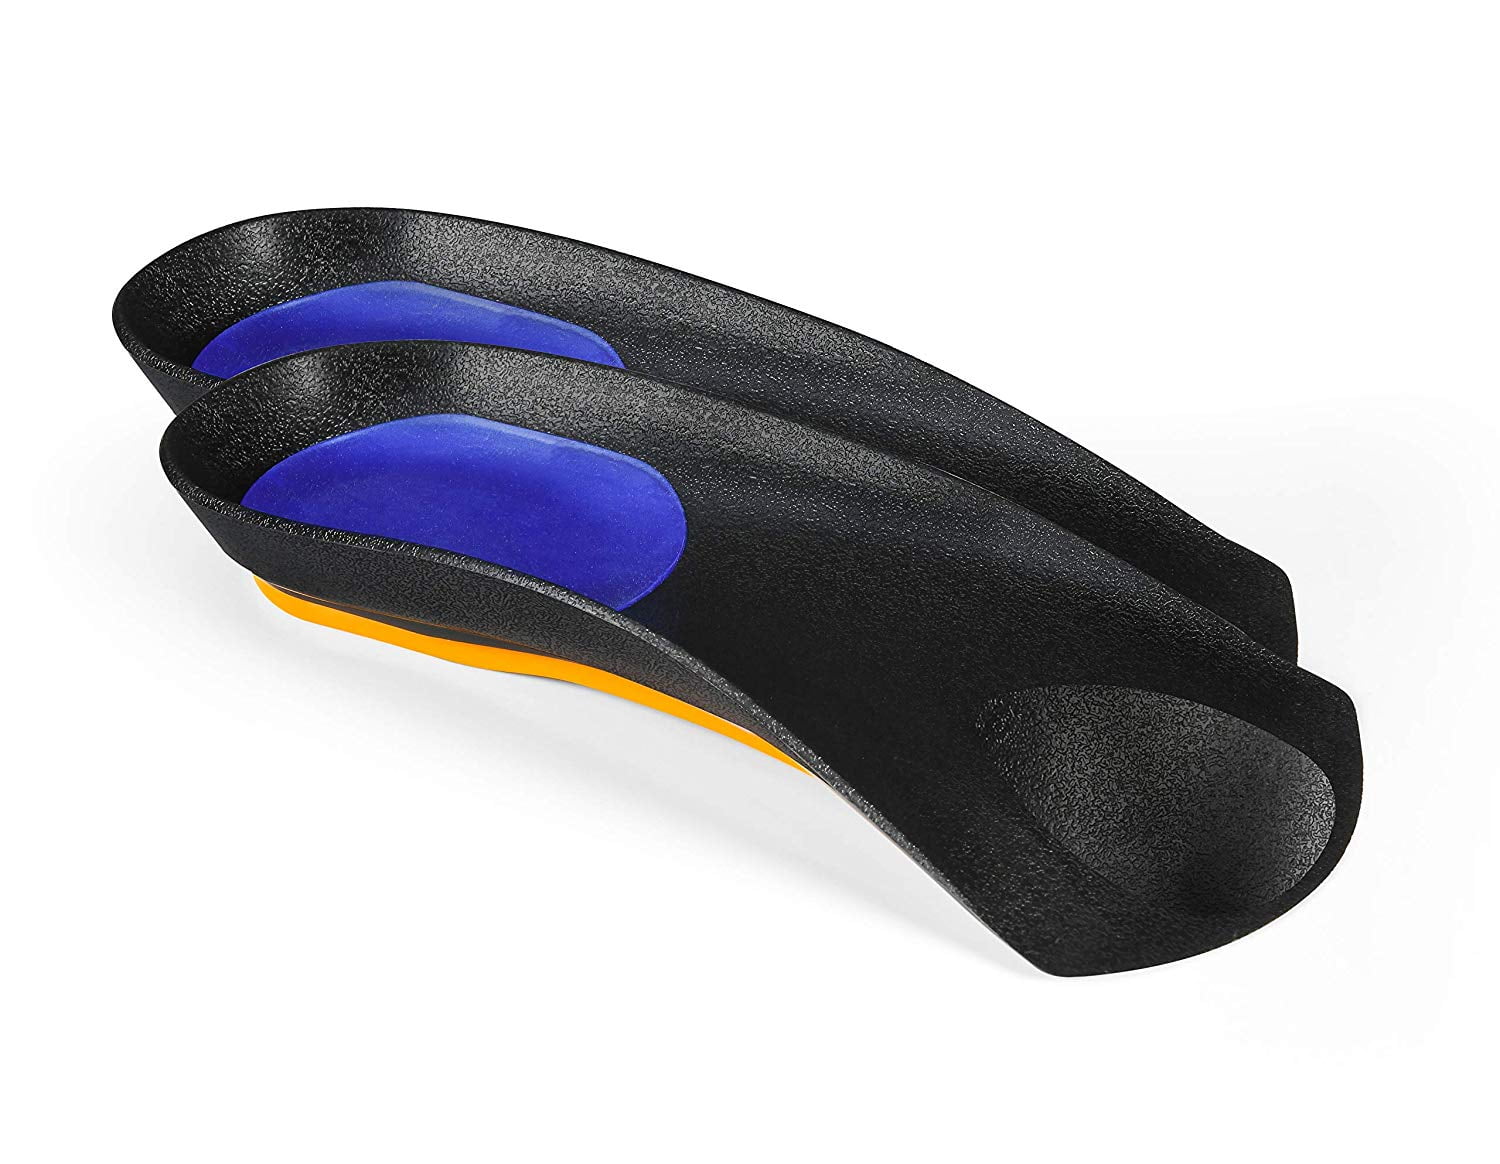 Superthotics Orthotic Inserts Arch Support Shoe Insoles Men 9.5-11 NEW 